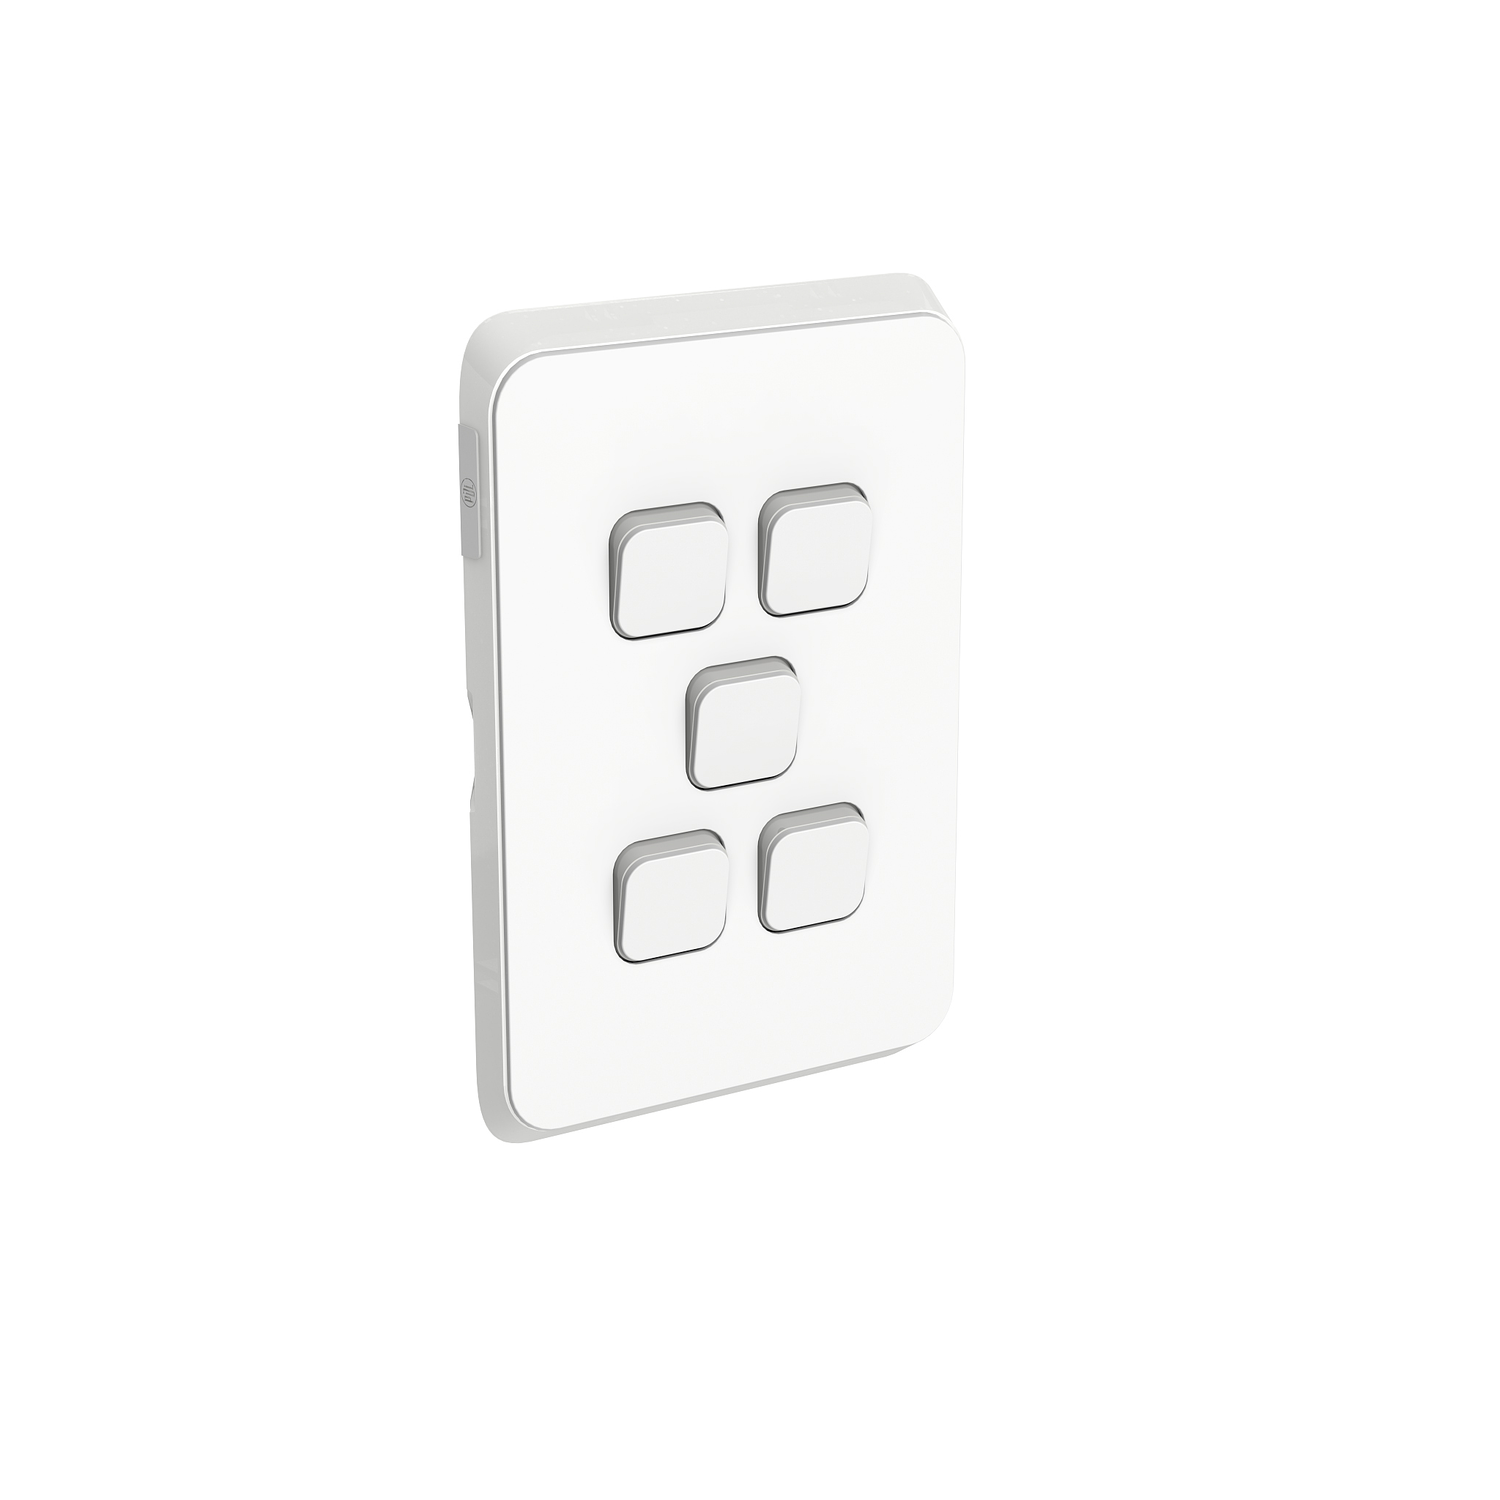 PDL Iconic - Cover Plate Switch 5-Gang - Vivid White